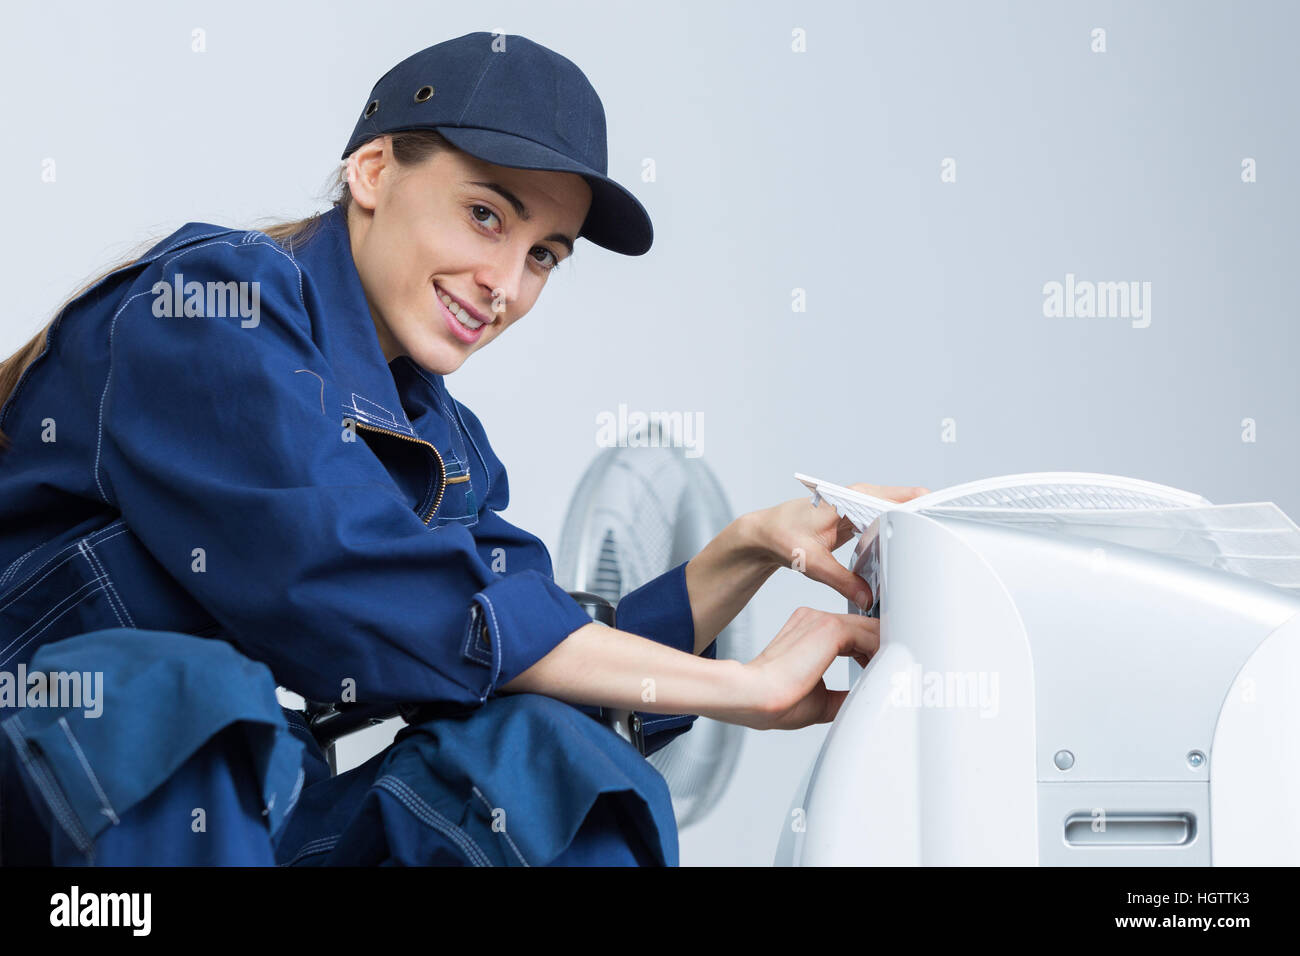 Woman working on air conditioning unit Stock Photo